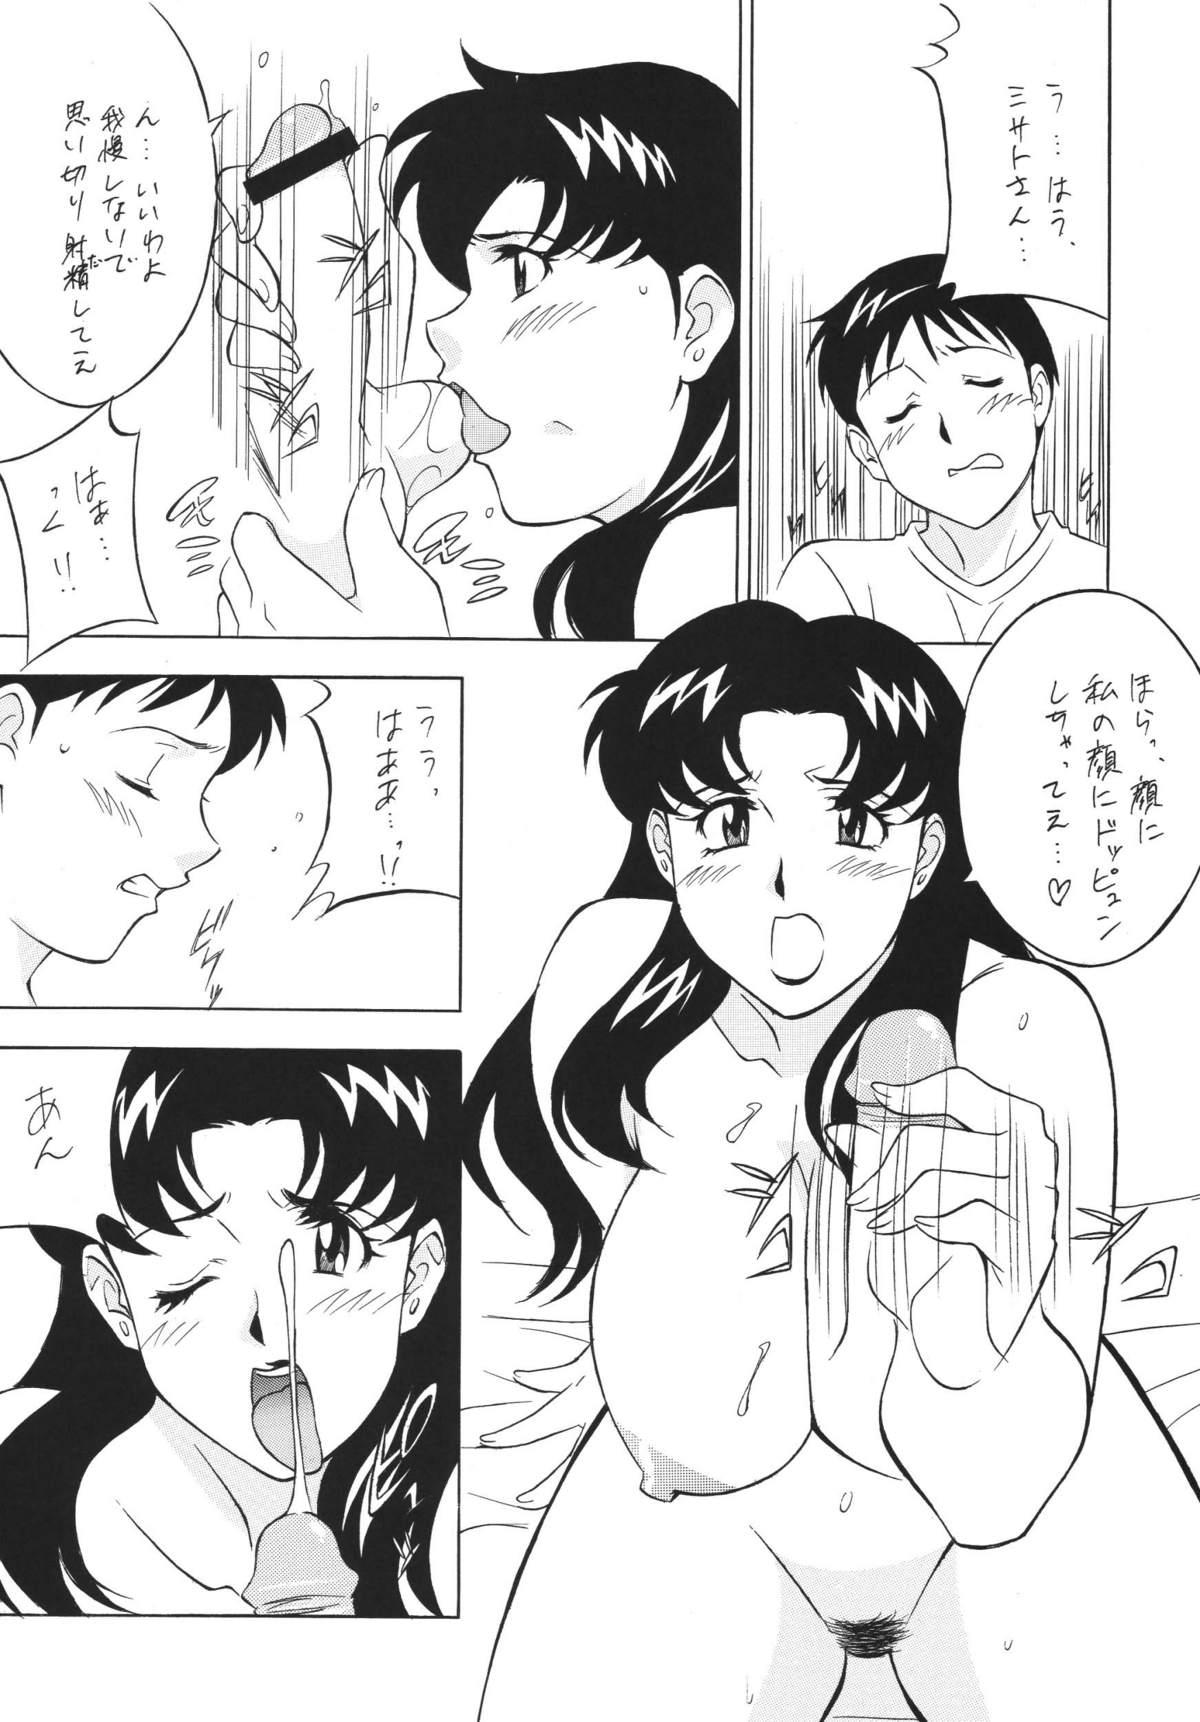 Class Room NEXT Climax Magazine 10 - Neon genesis evangelion Cougars - Page 12